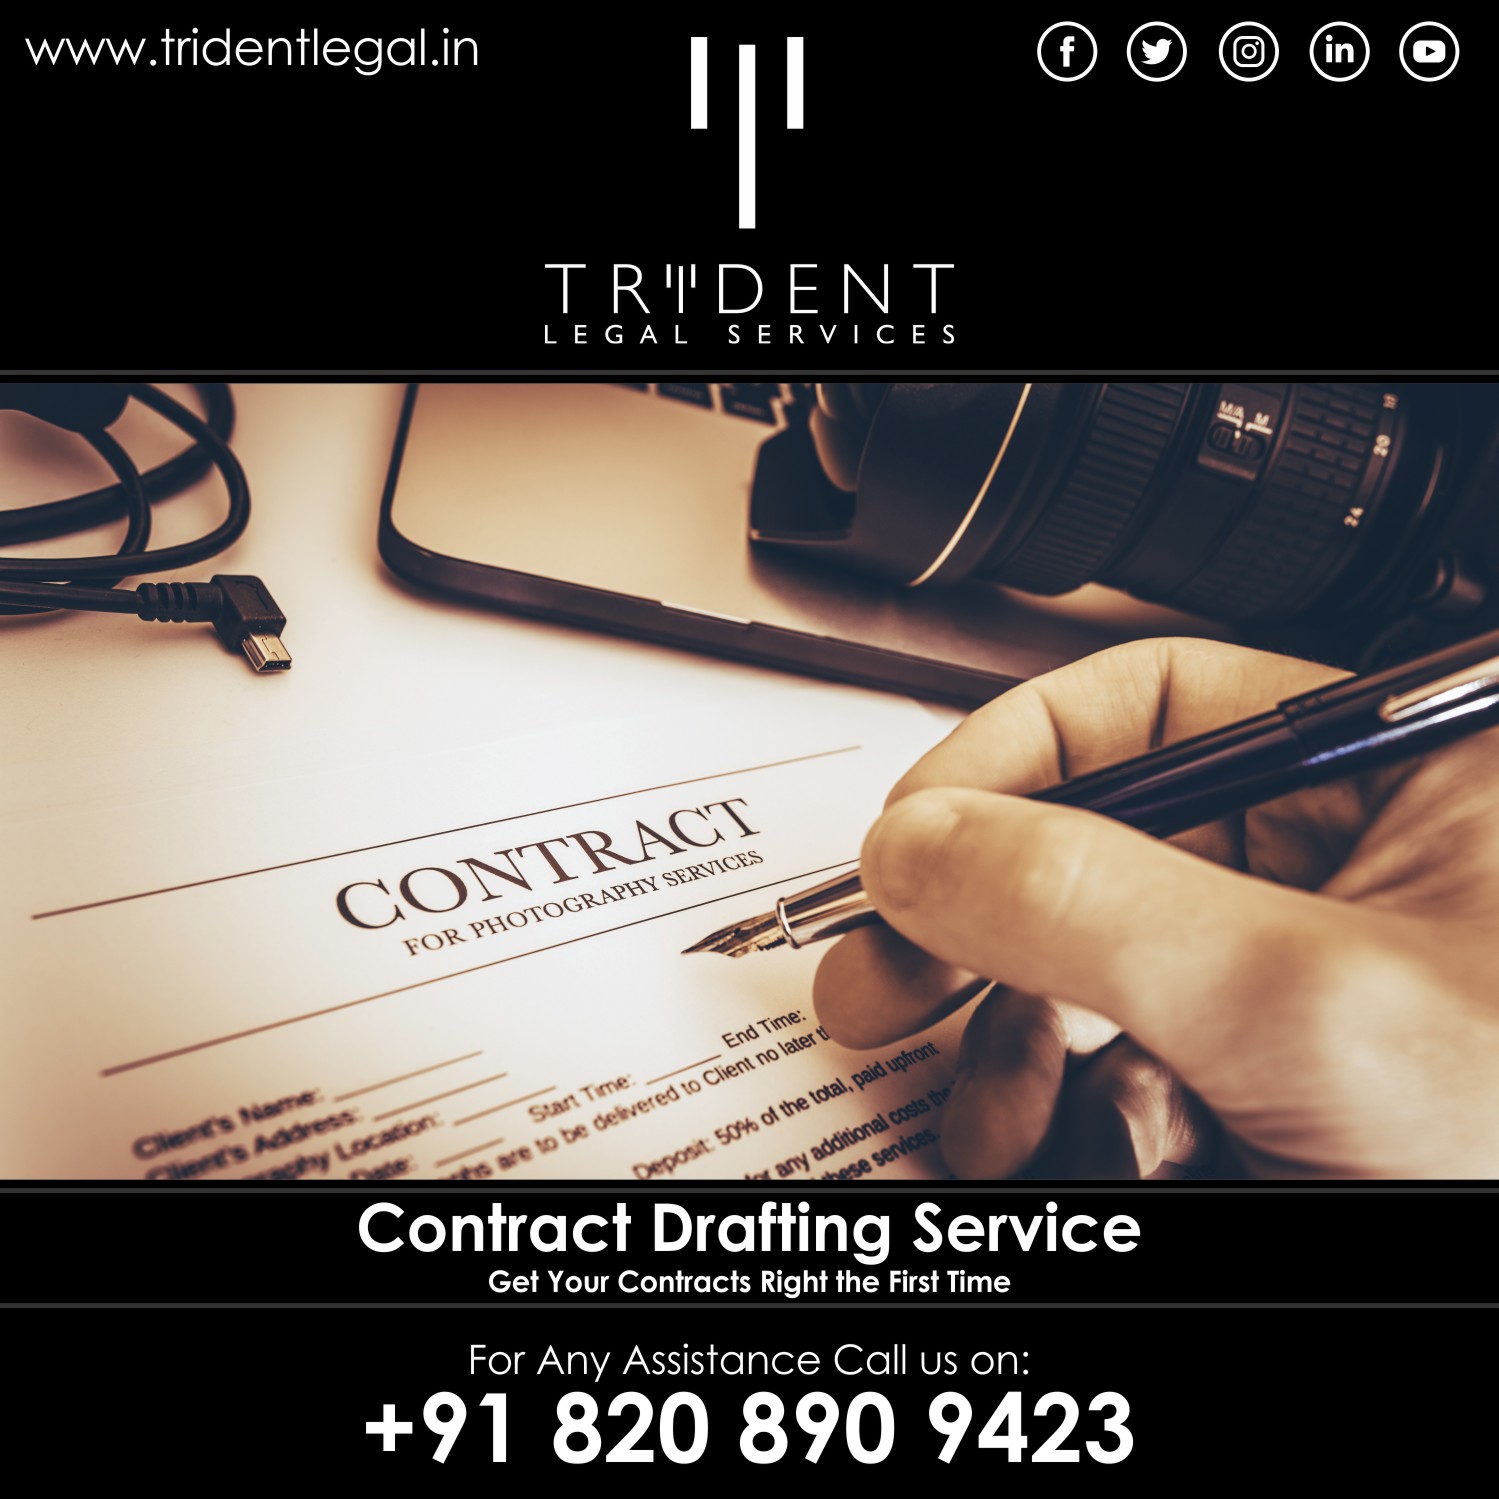 Contract Drafting Service in Pune